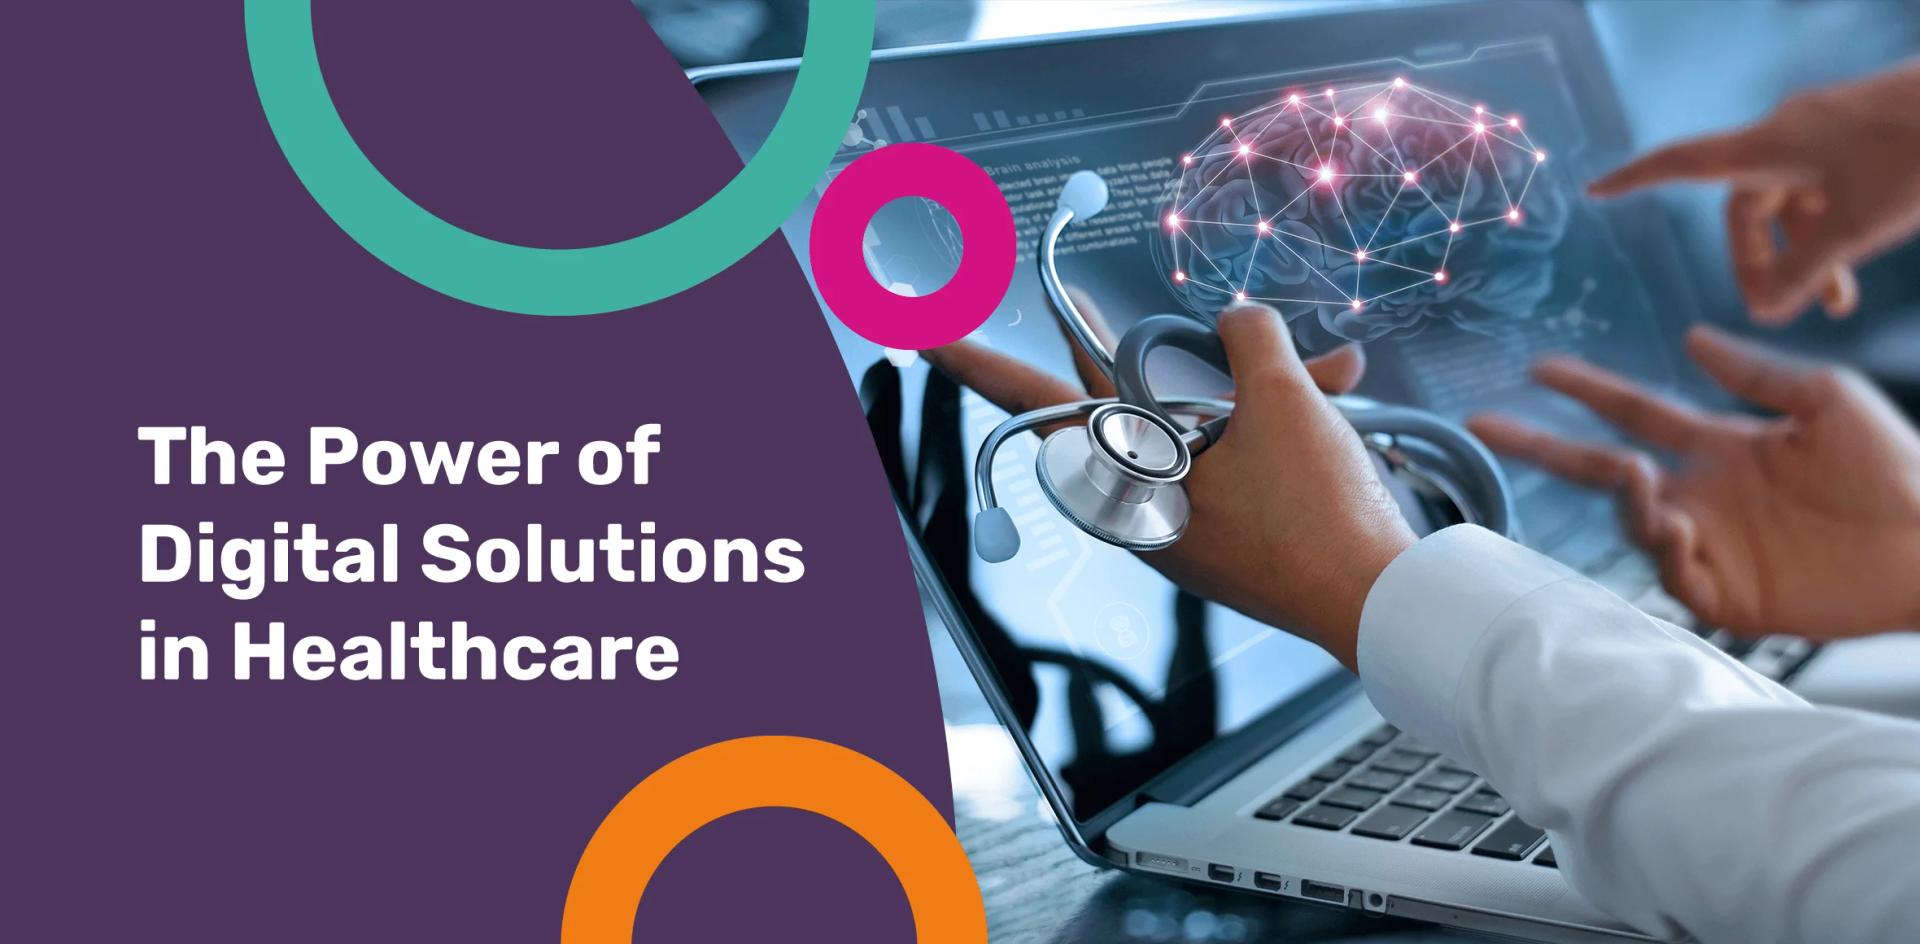 The Power of Digital Solutions in Healthcare